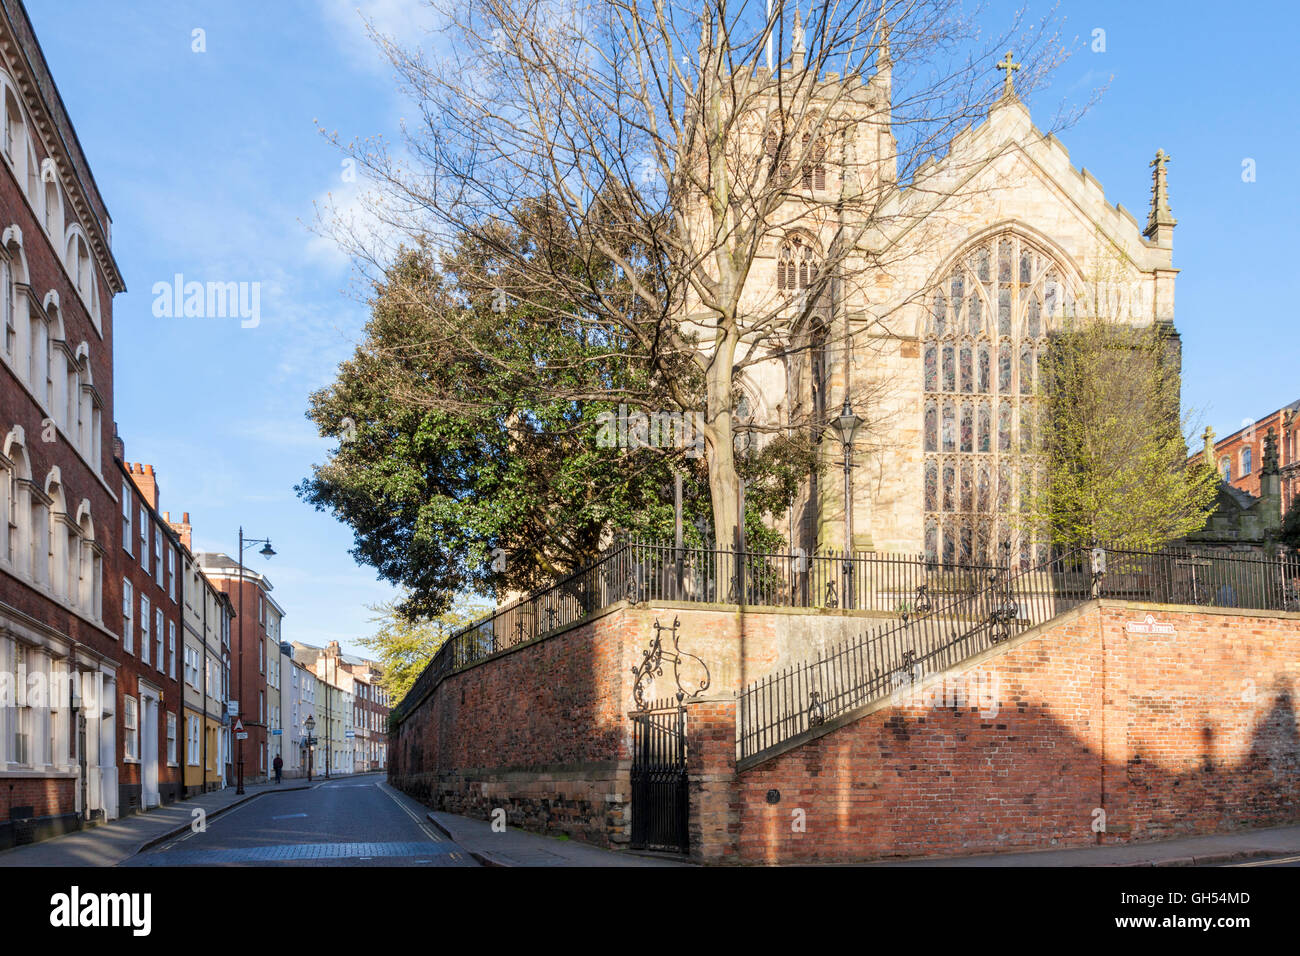 St Mary's Church, a medieval church standing above the surrounding buildings on High Pavement in the Lace Market, Nottingham, England, UK Stock Photo